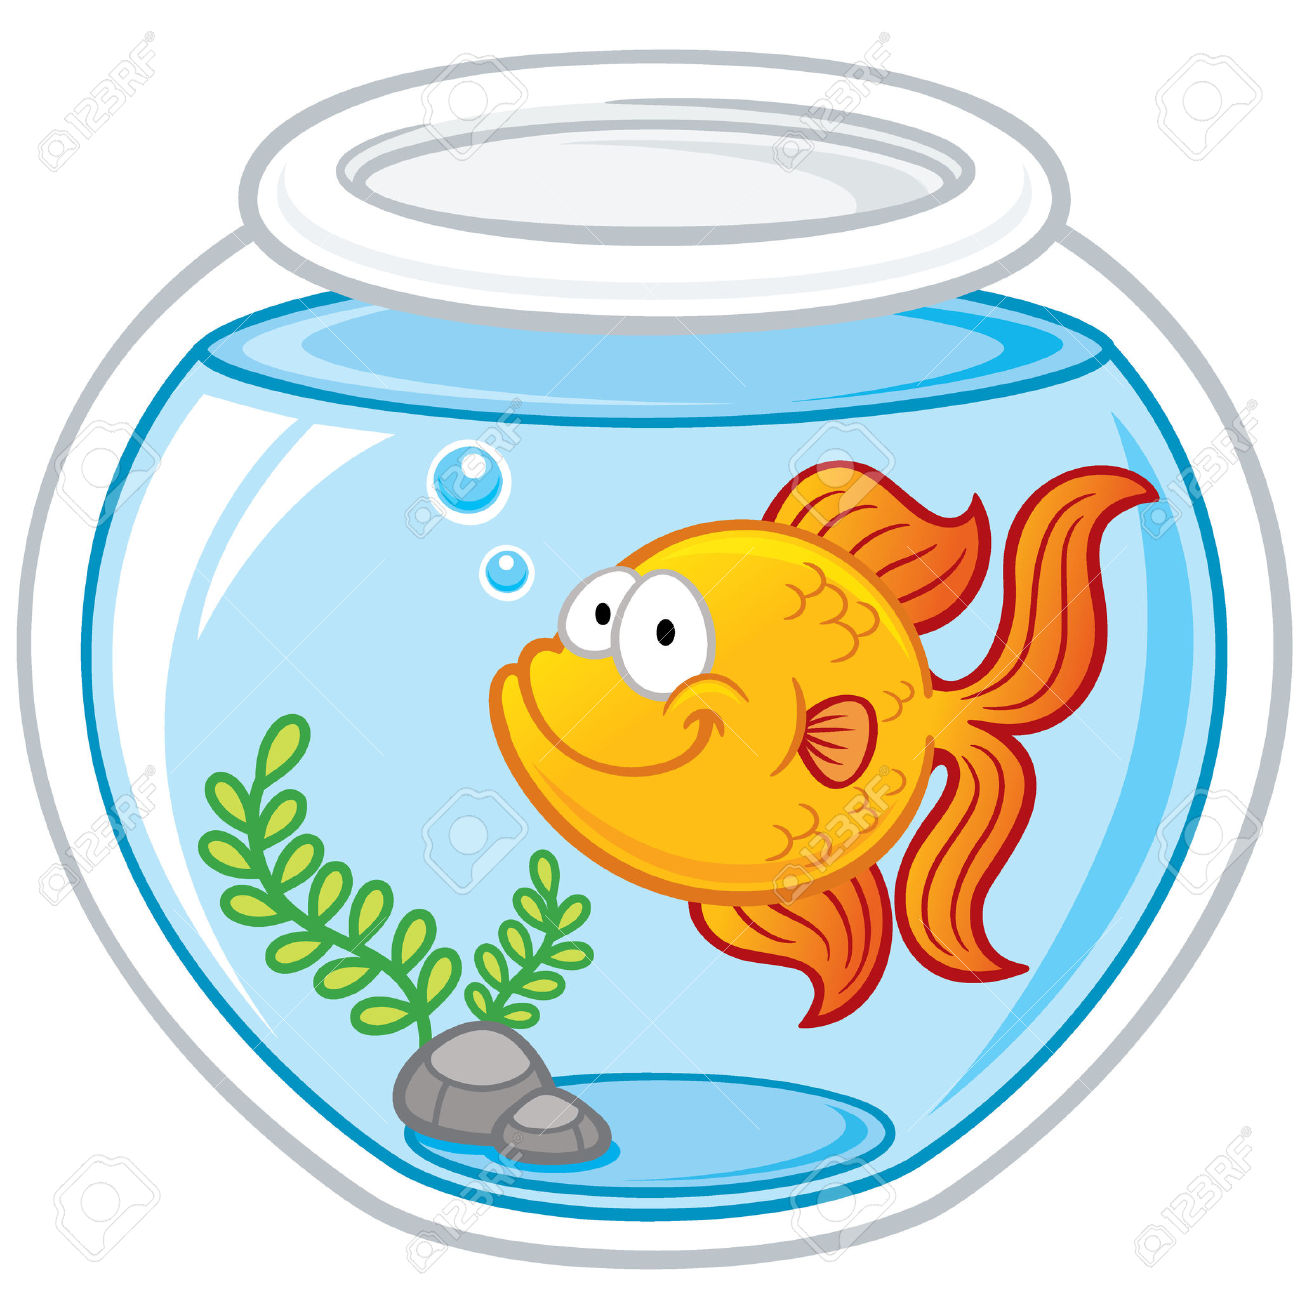 clipart of fish bowl - photo #37